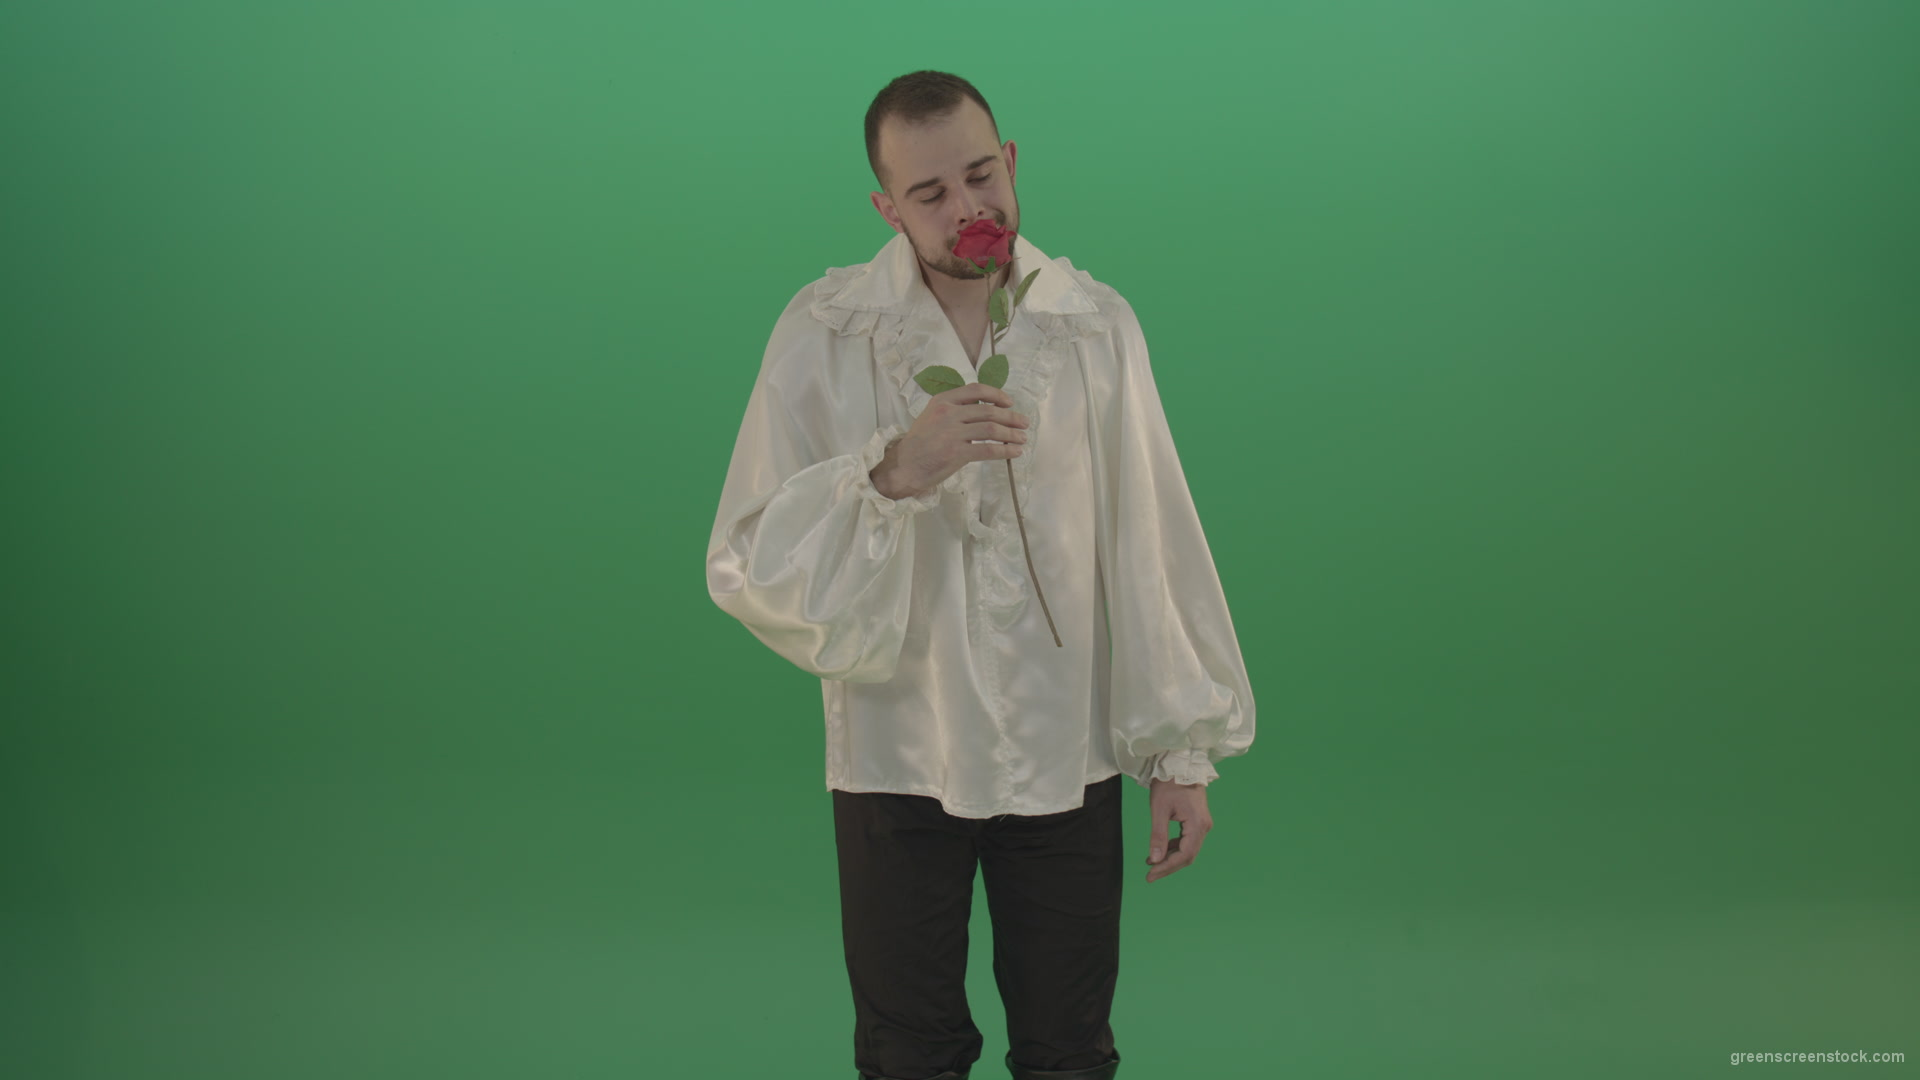 Glancing-at-the-red-flower-the-guy-gives-love-rose-to-camera-isolated-on-green-screen_004 Green Screen Stock